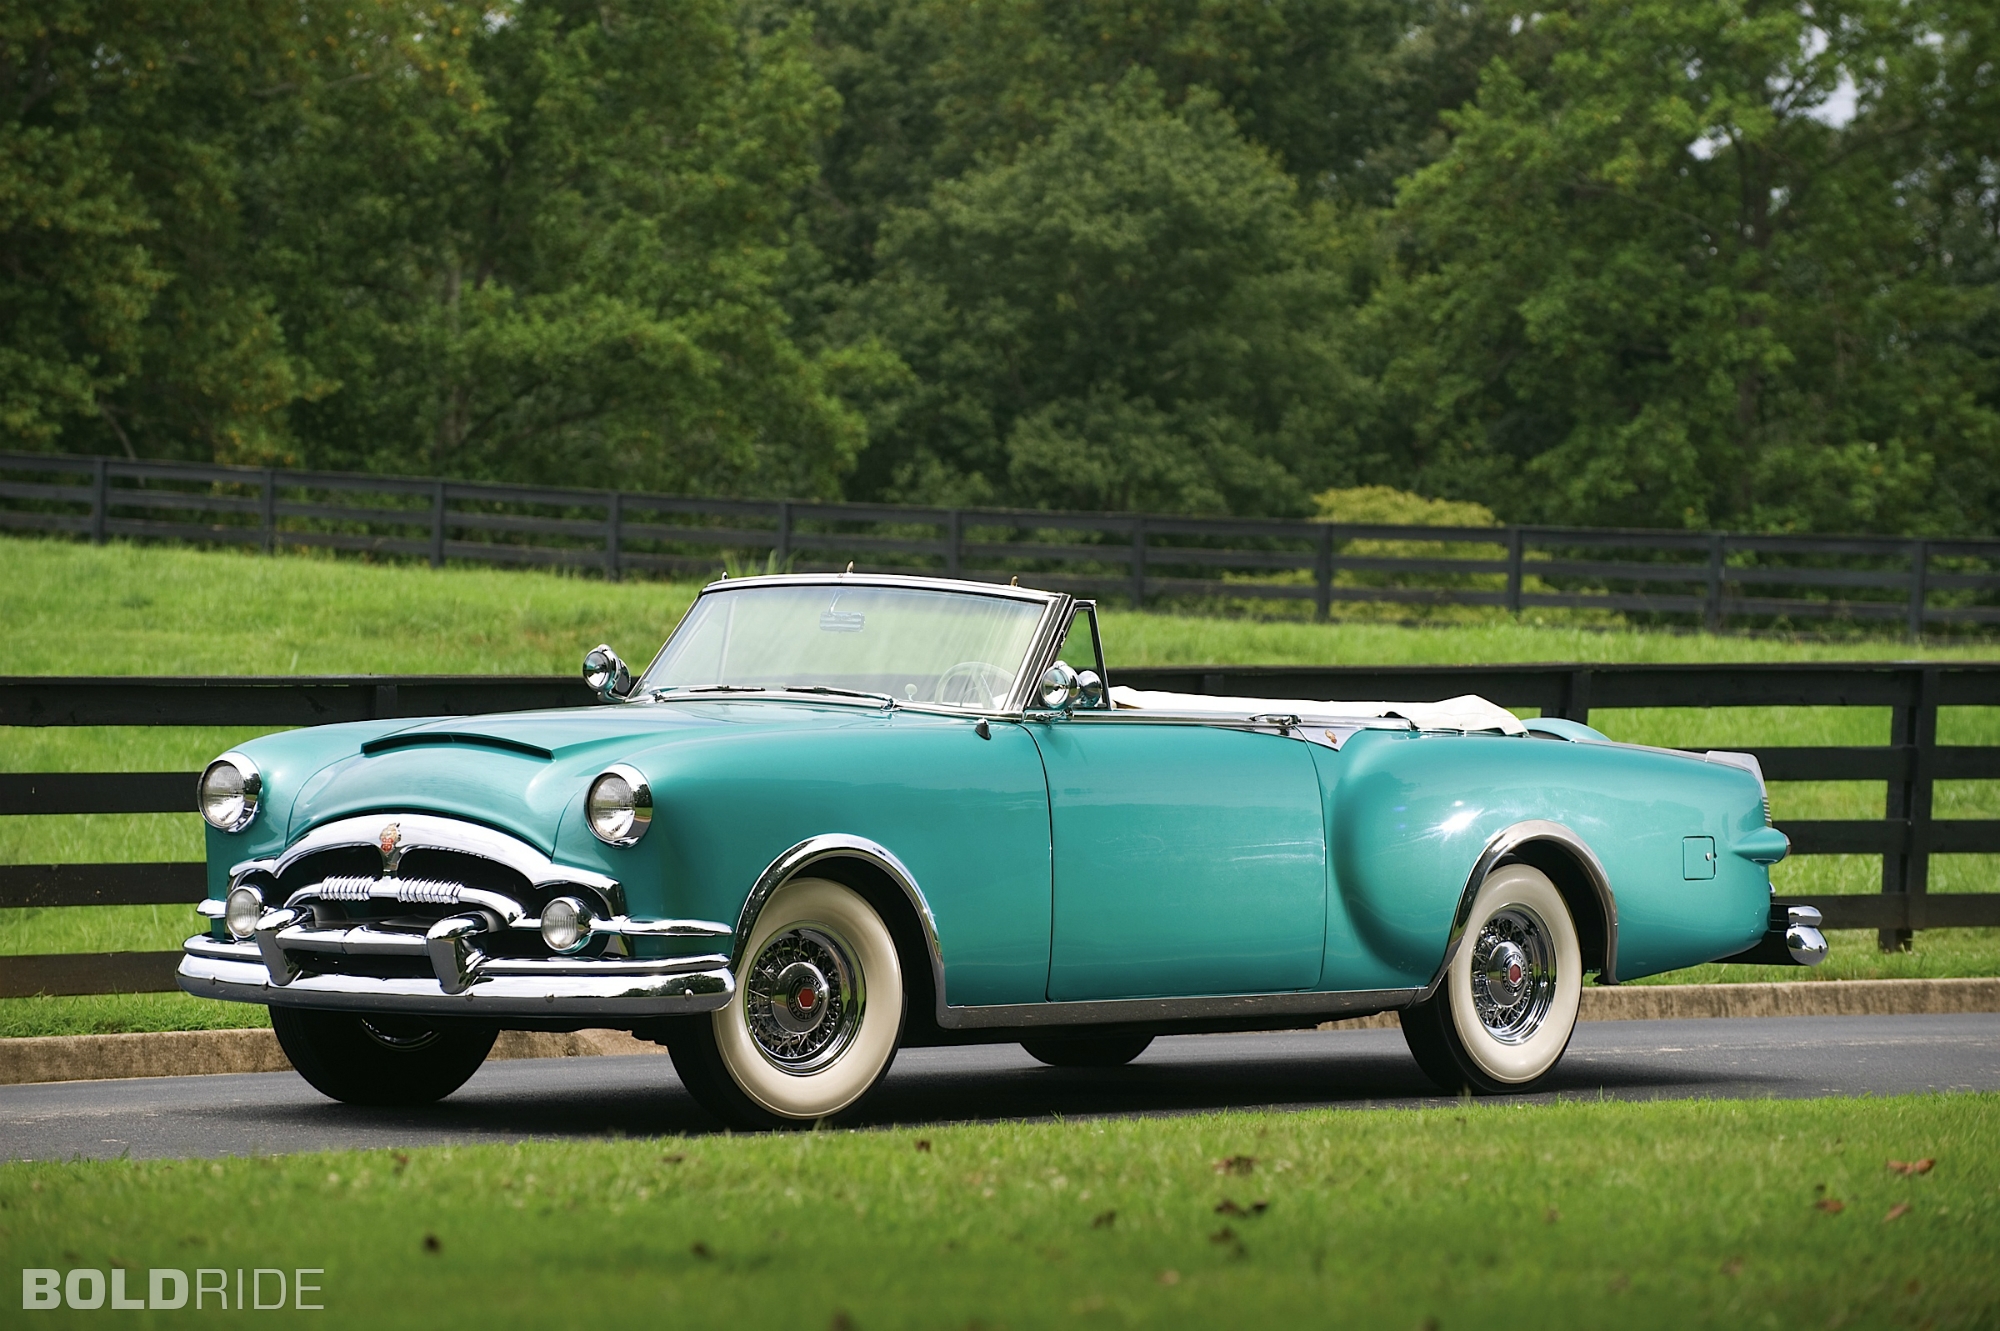 1953 Packard Caribbean Convertible Boldride.com - Pictures, Wallpapers